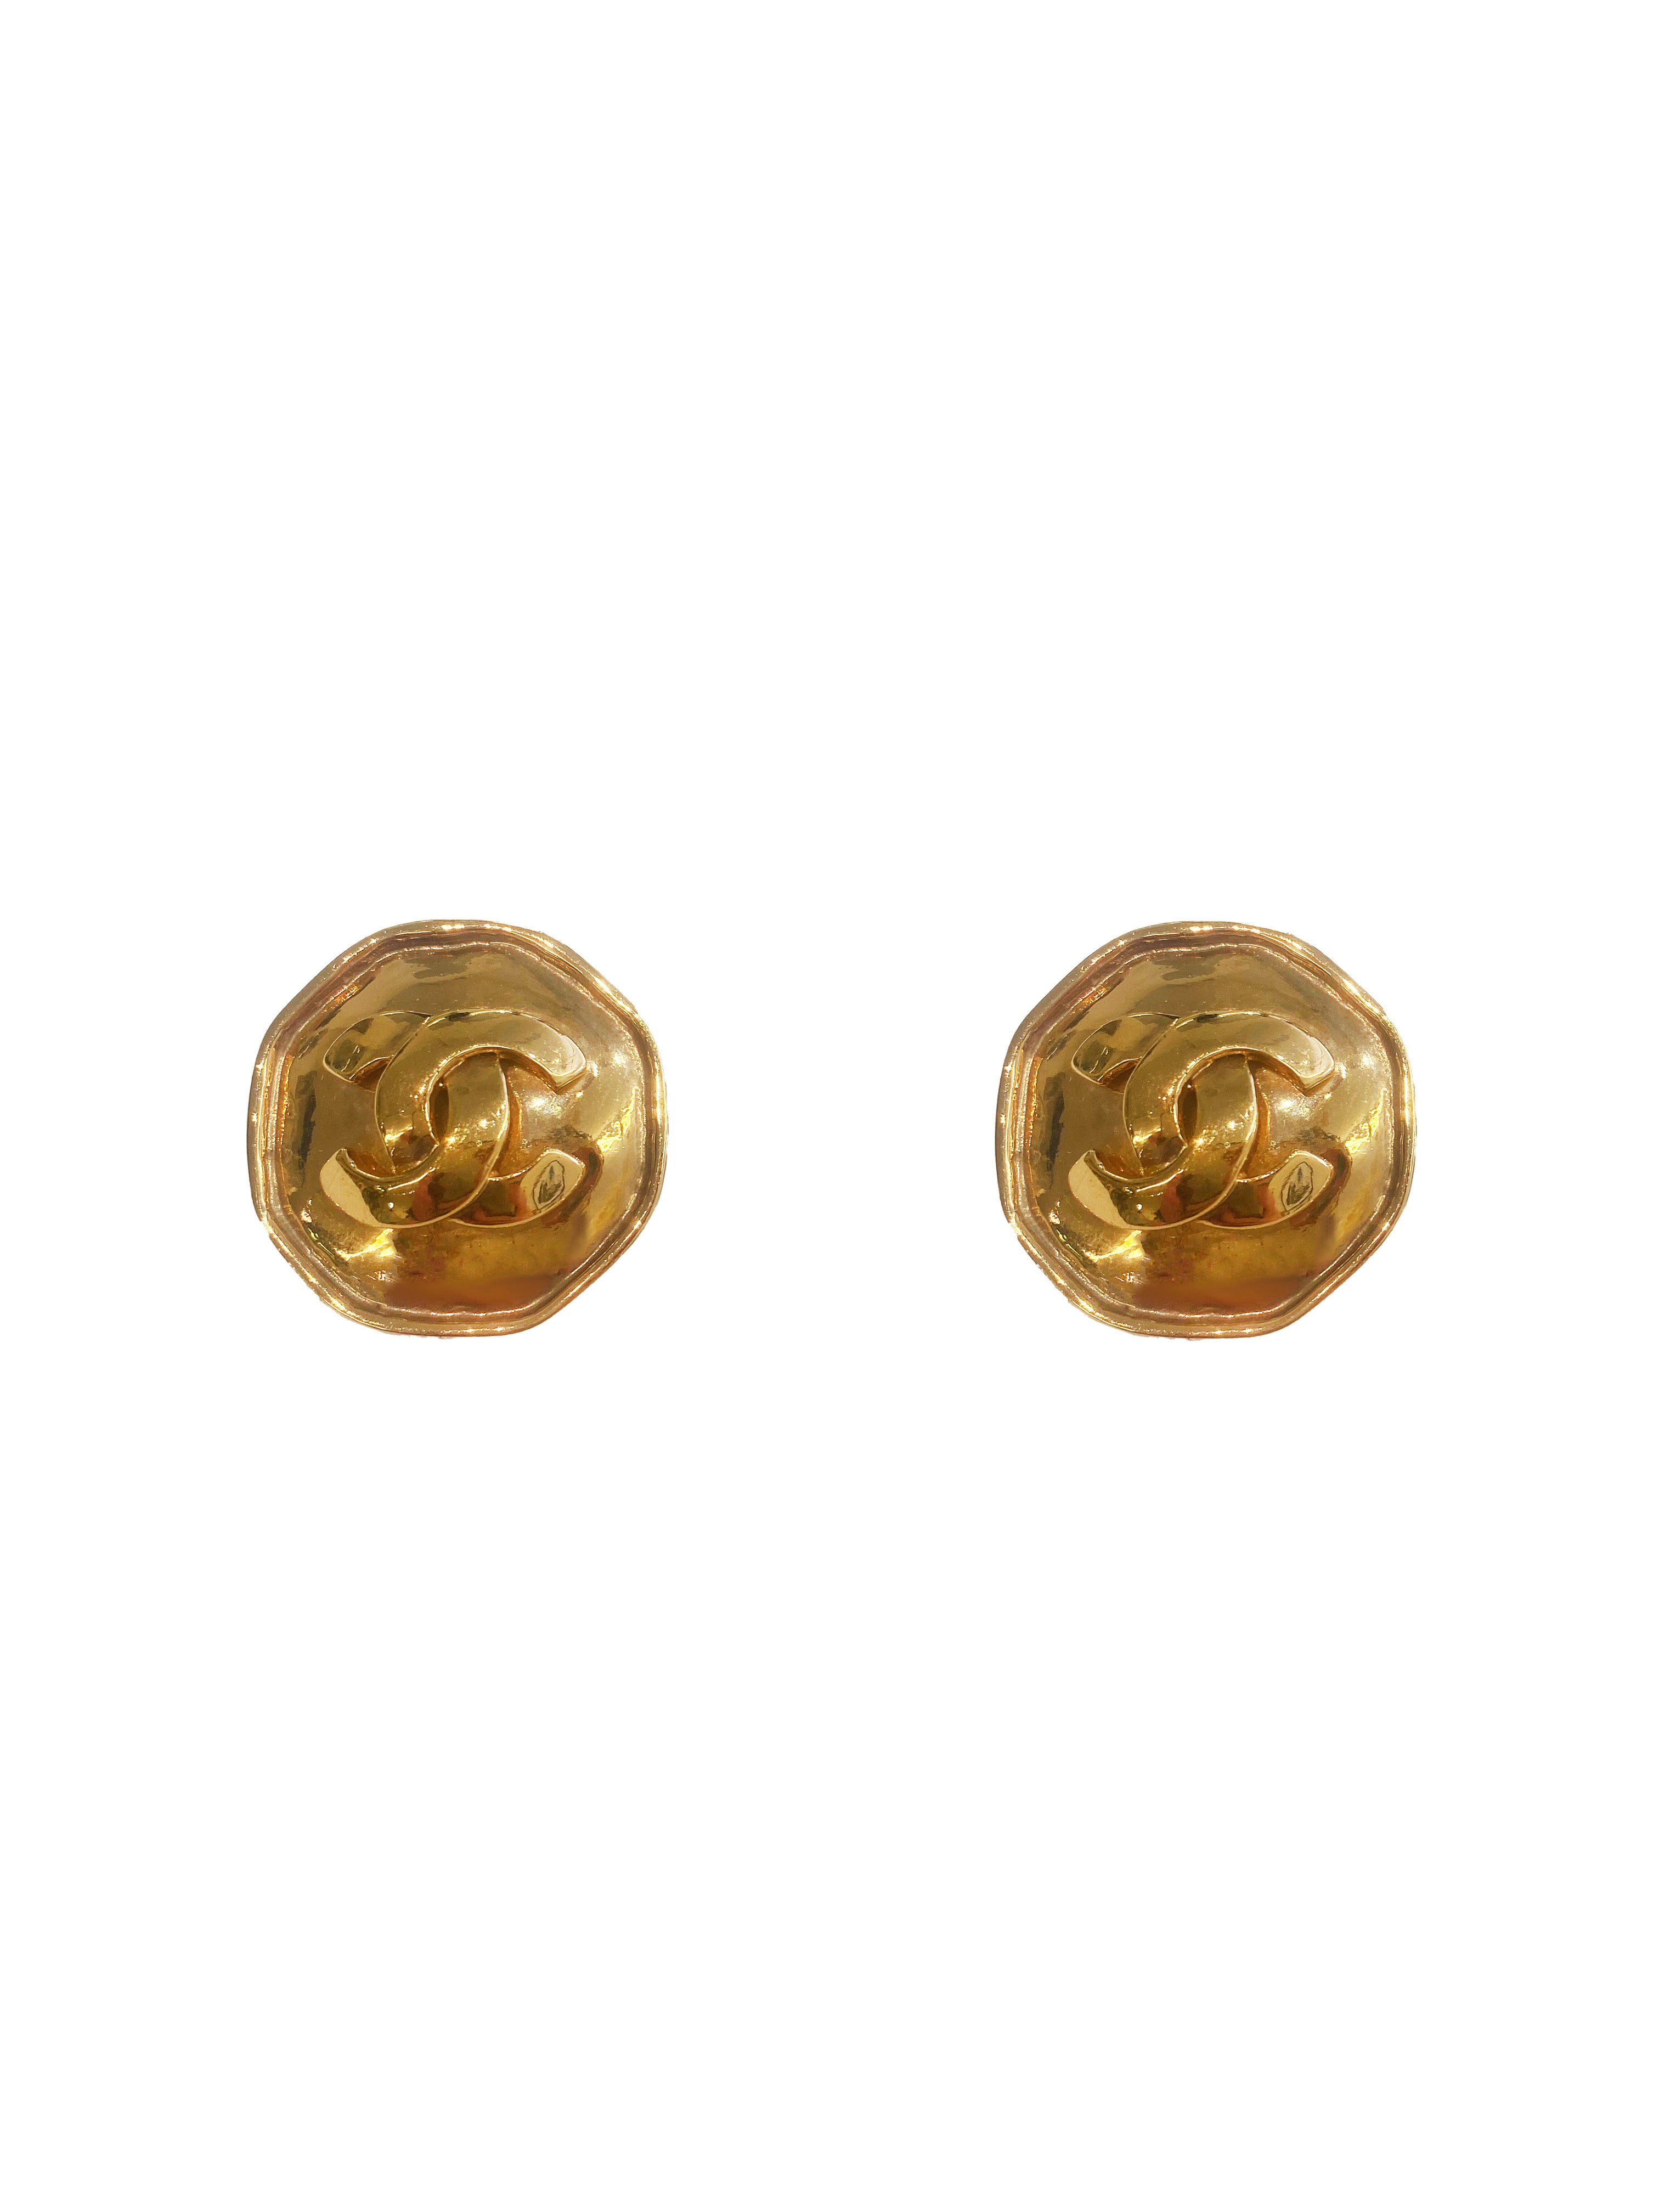 Chanel 1995 Stop Sign Clip-On Earrings